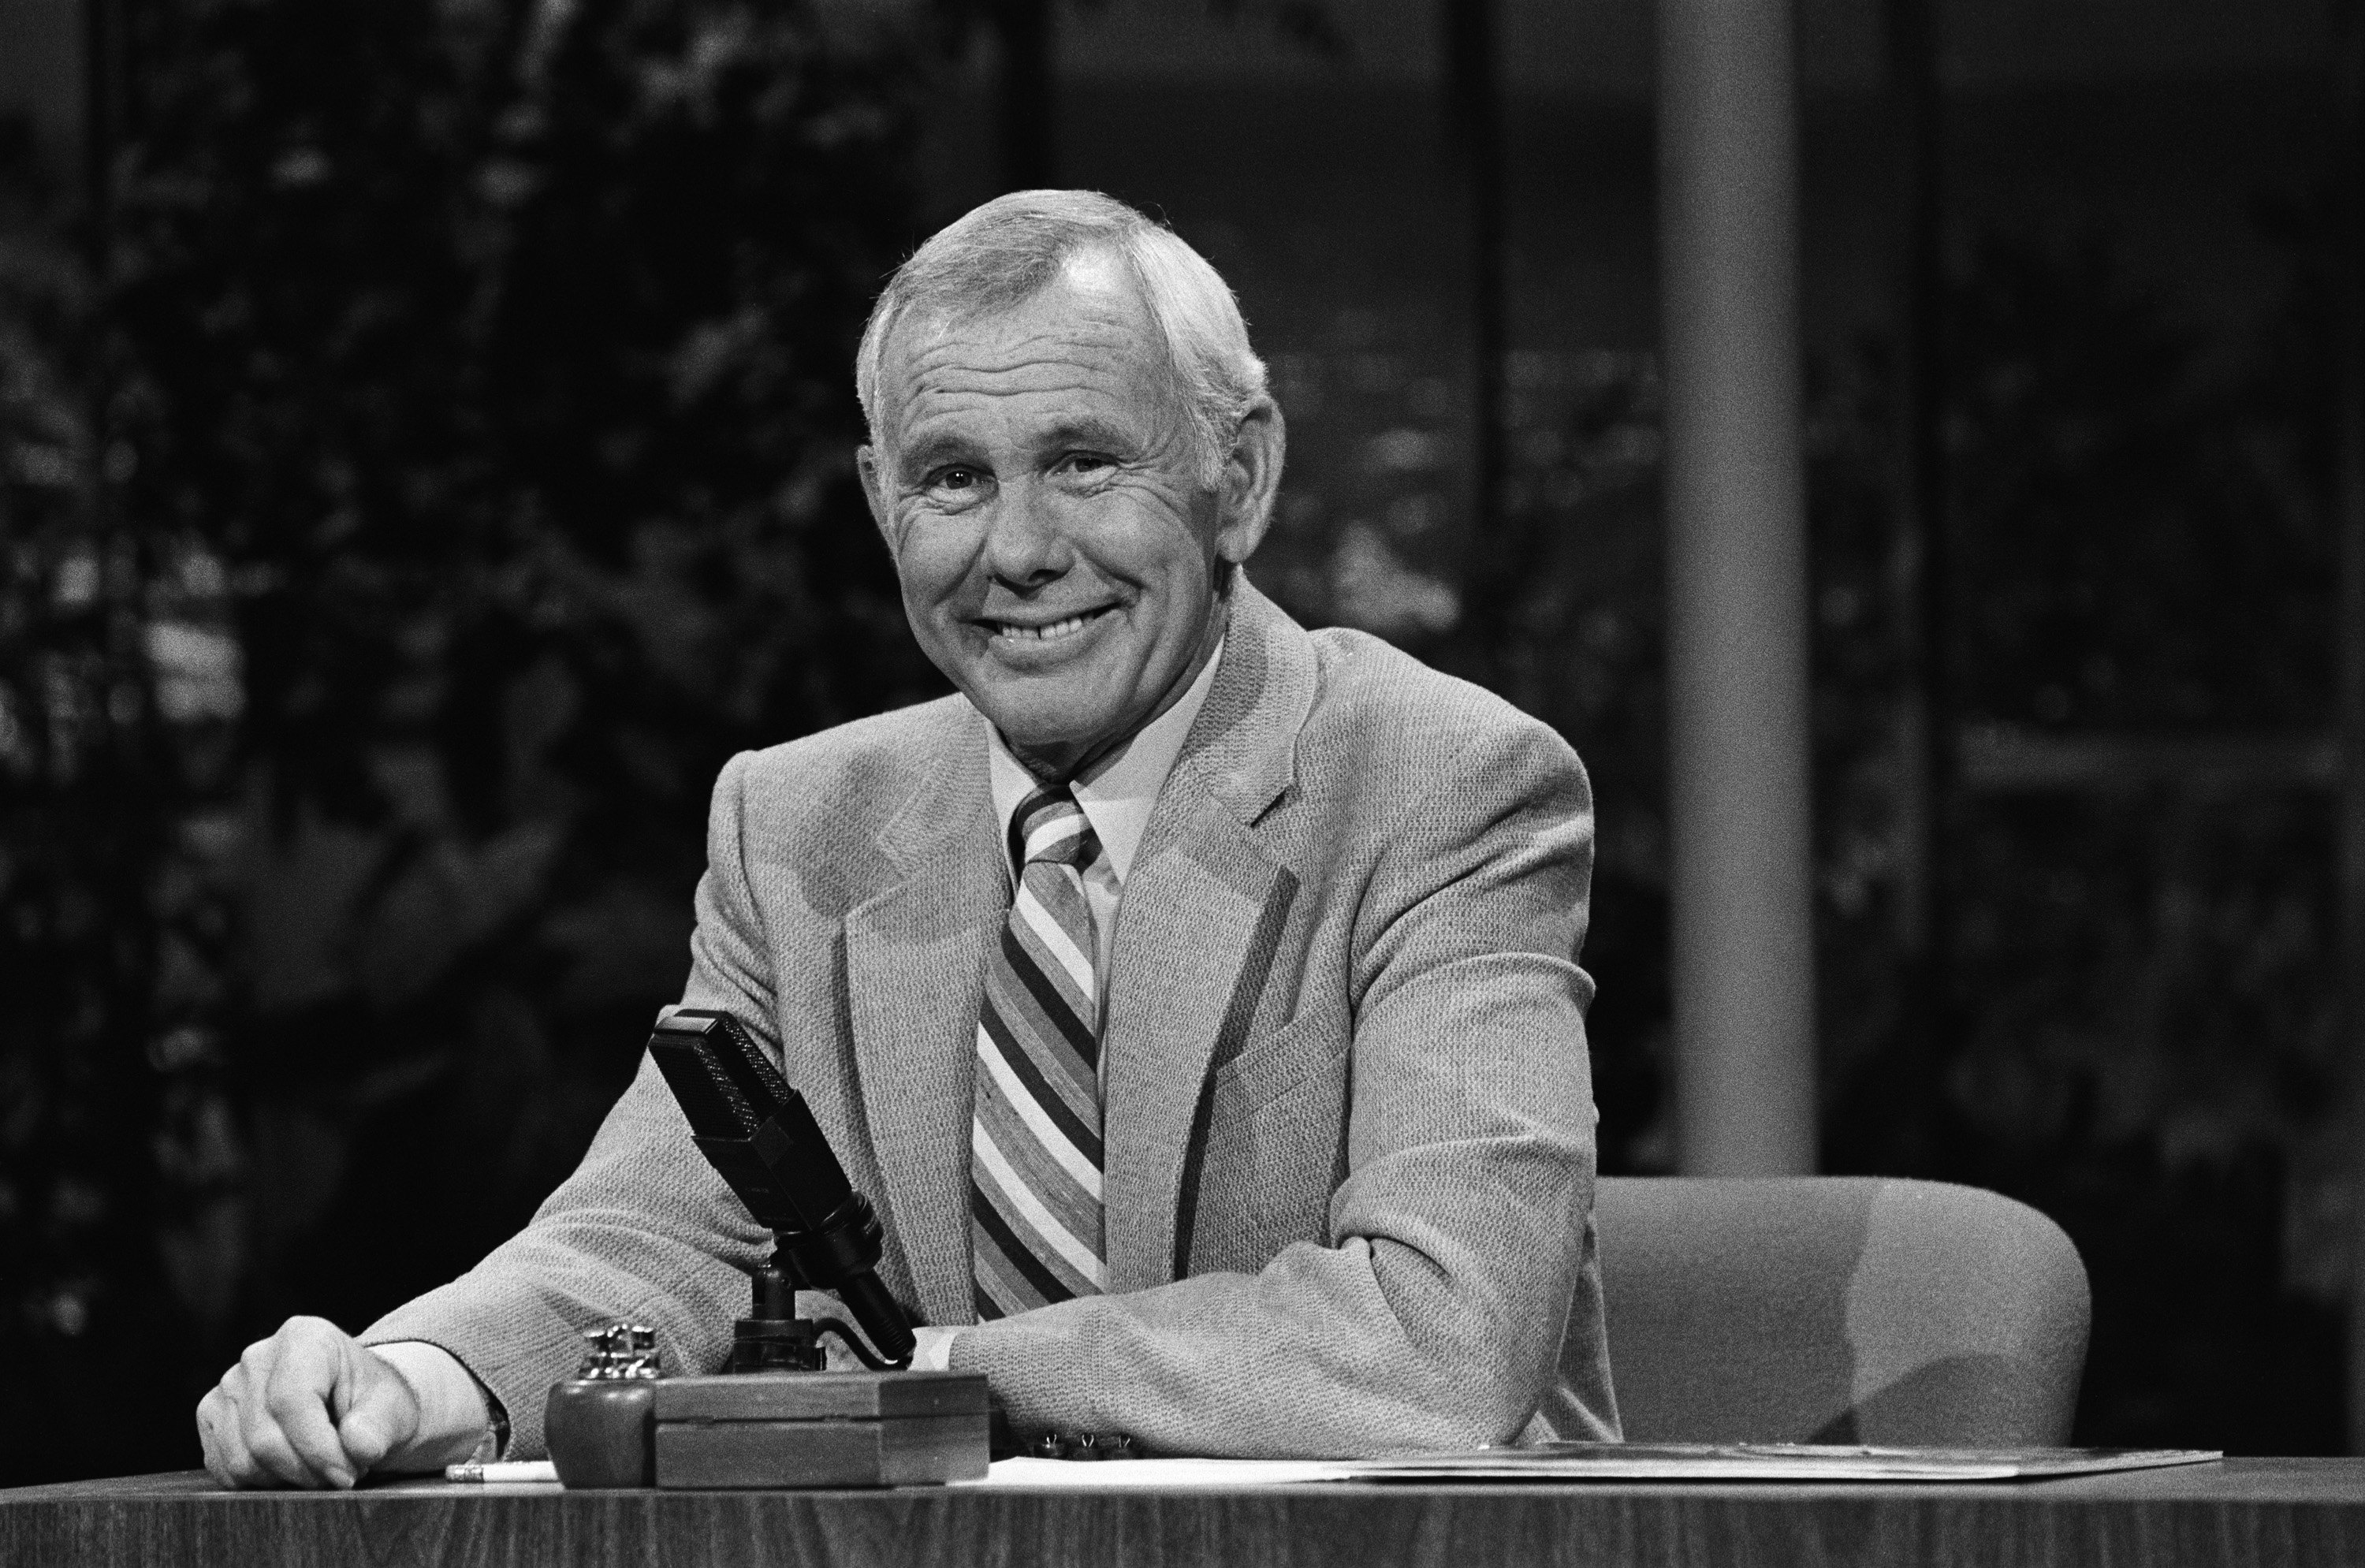 Johnny Carson's Only Known Grandchild Was Reportedly Raised on Welfare ...